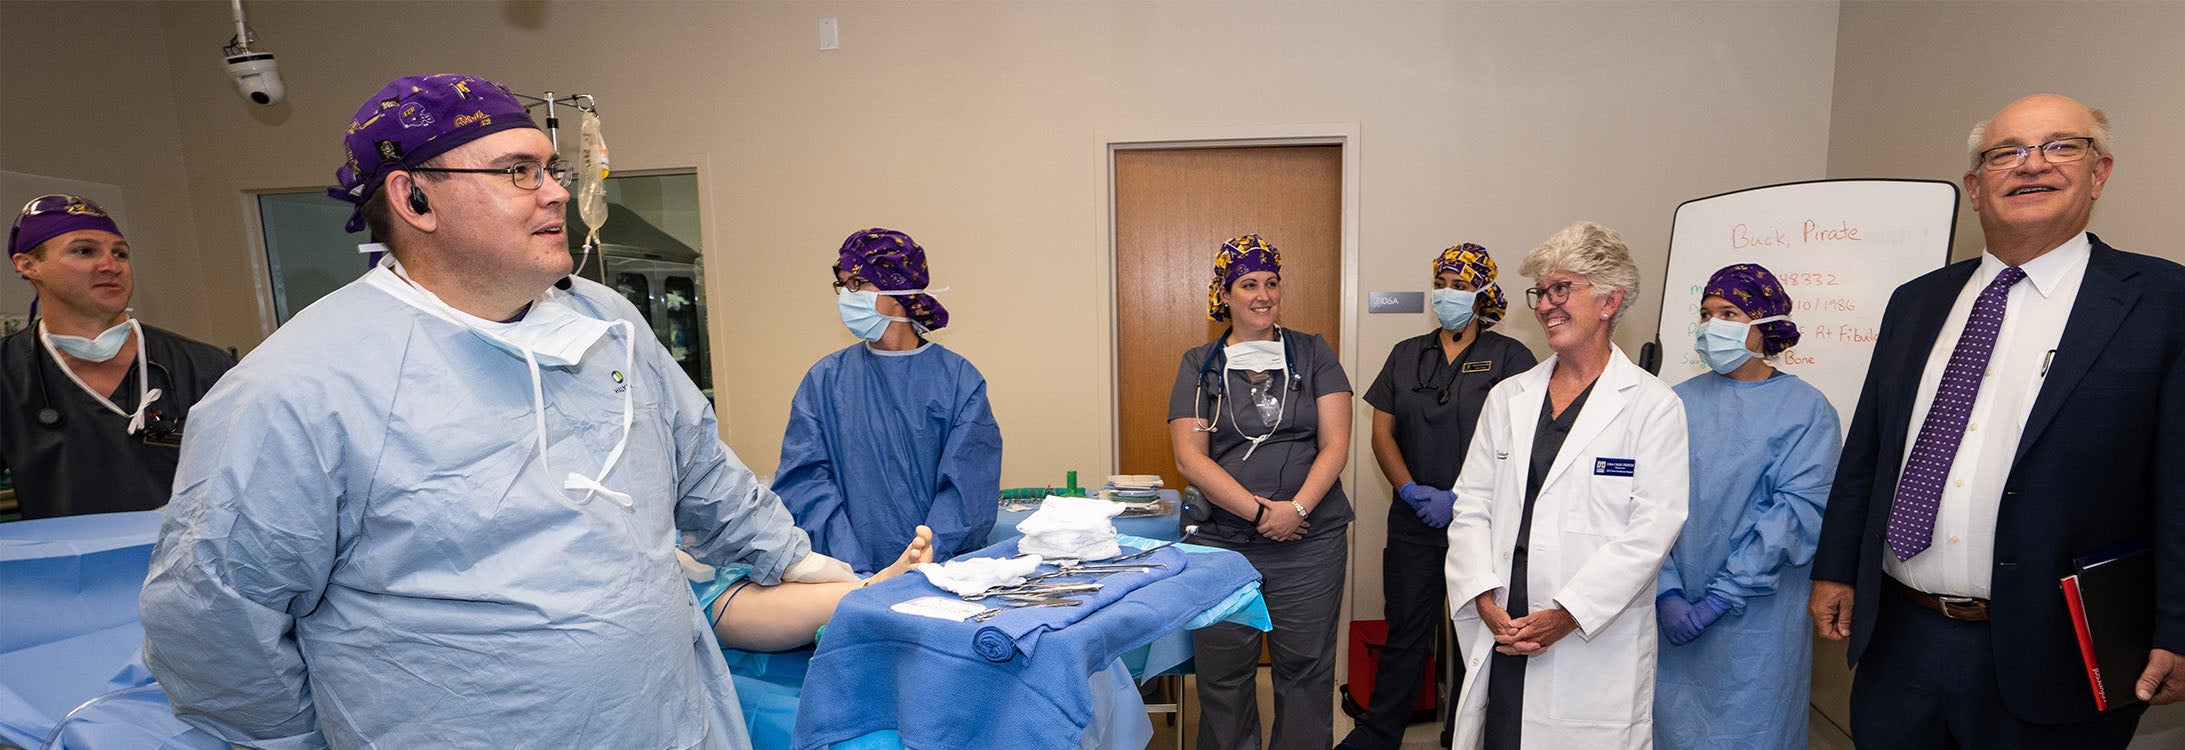 Members of the ECU Board of Trustees toured the College of Nursing and the College of Allied Health, including this simulated operating room. (Photos by Cliff Hollis)